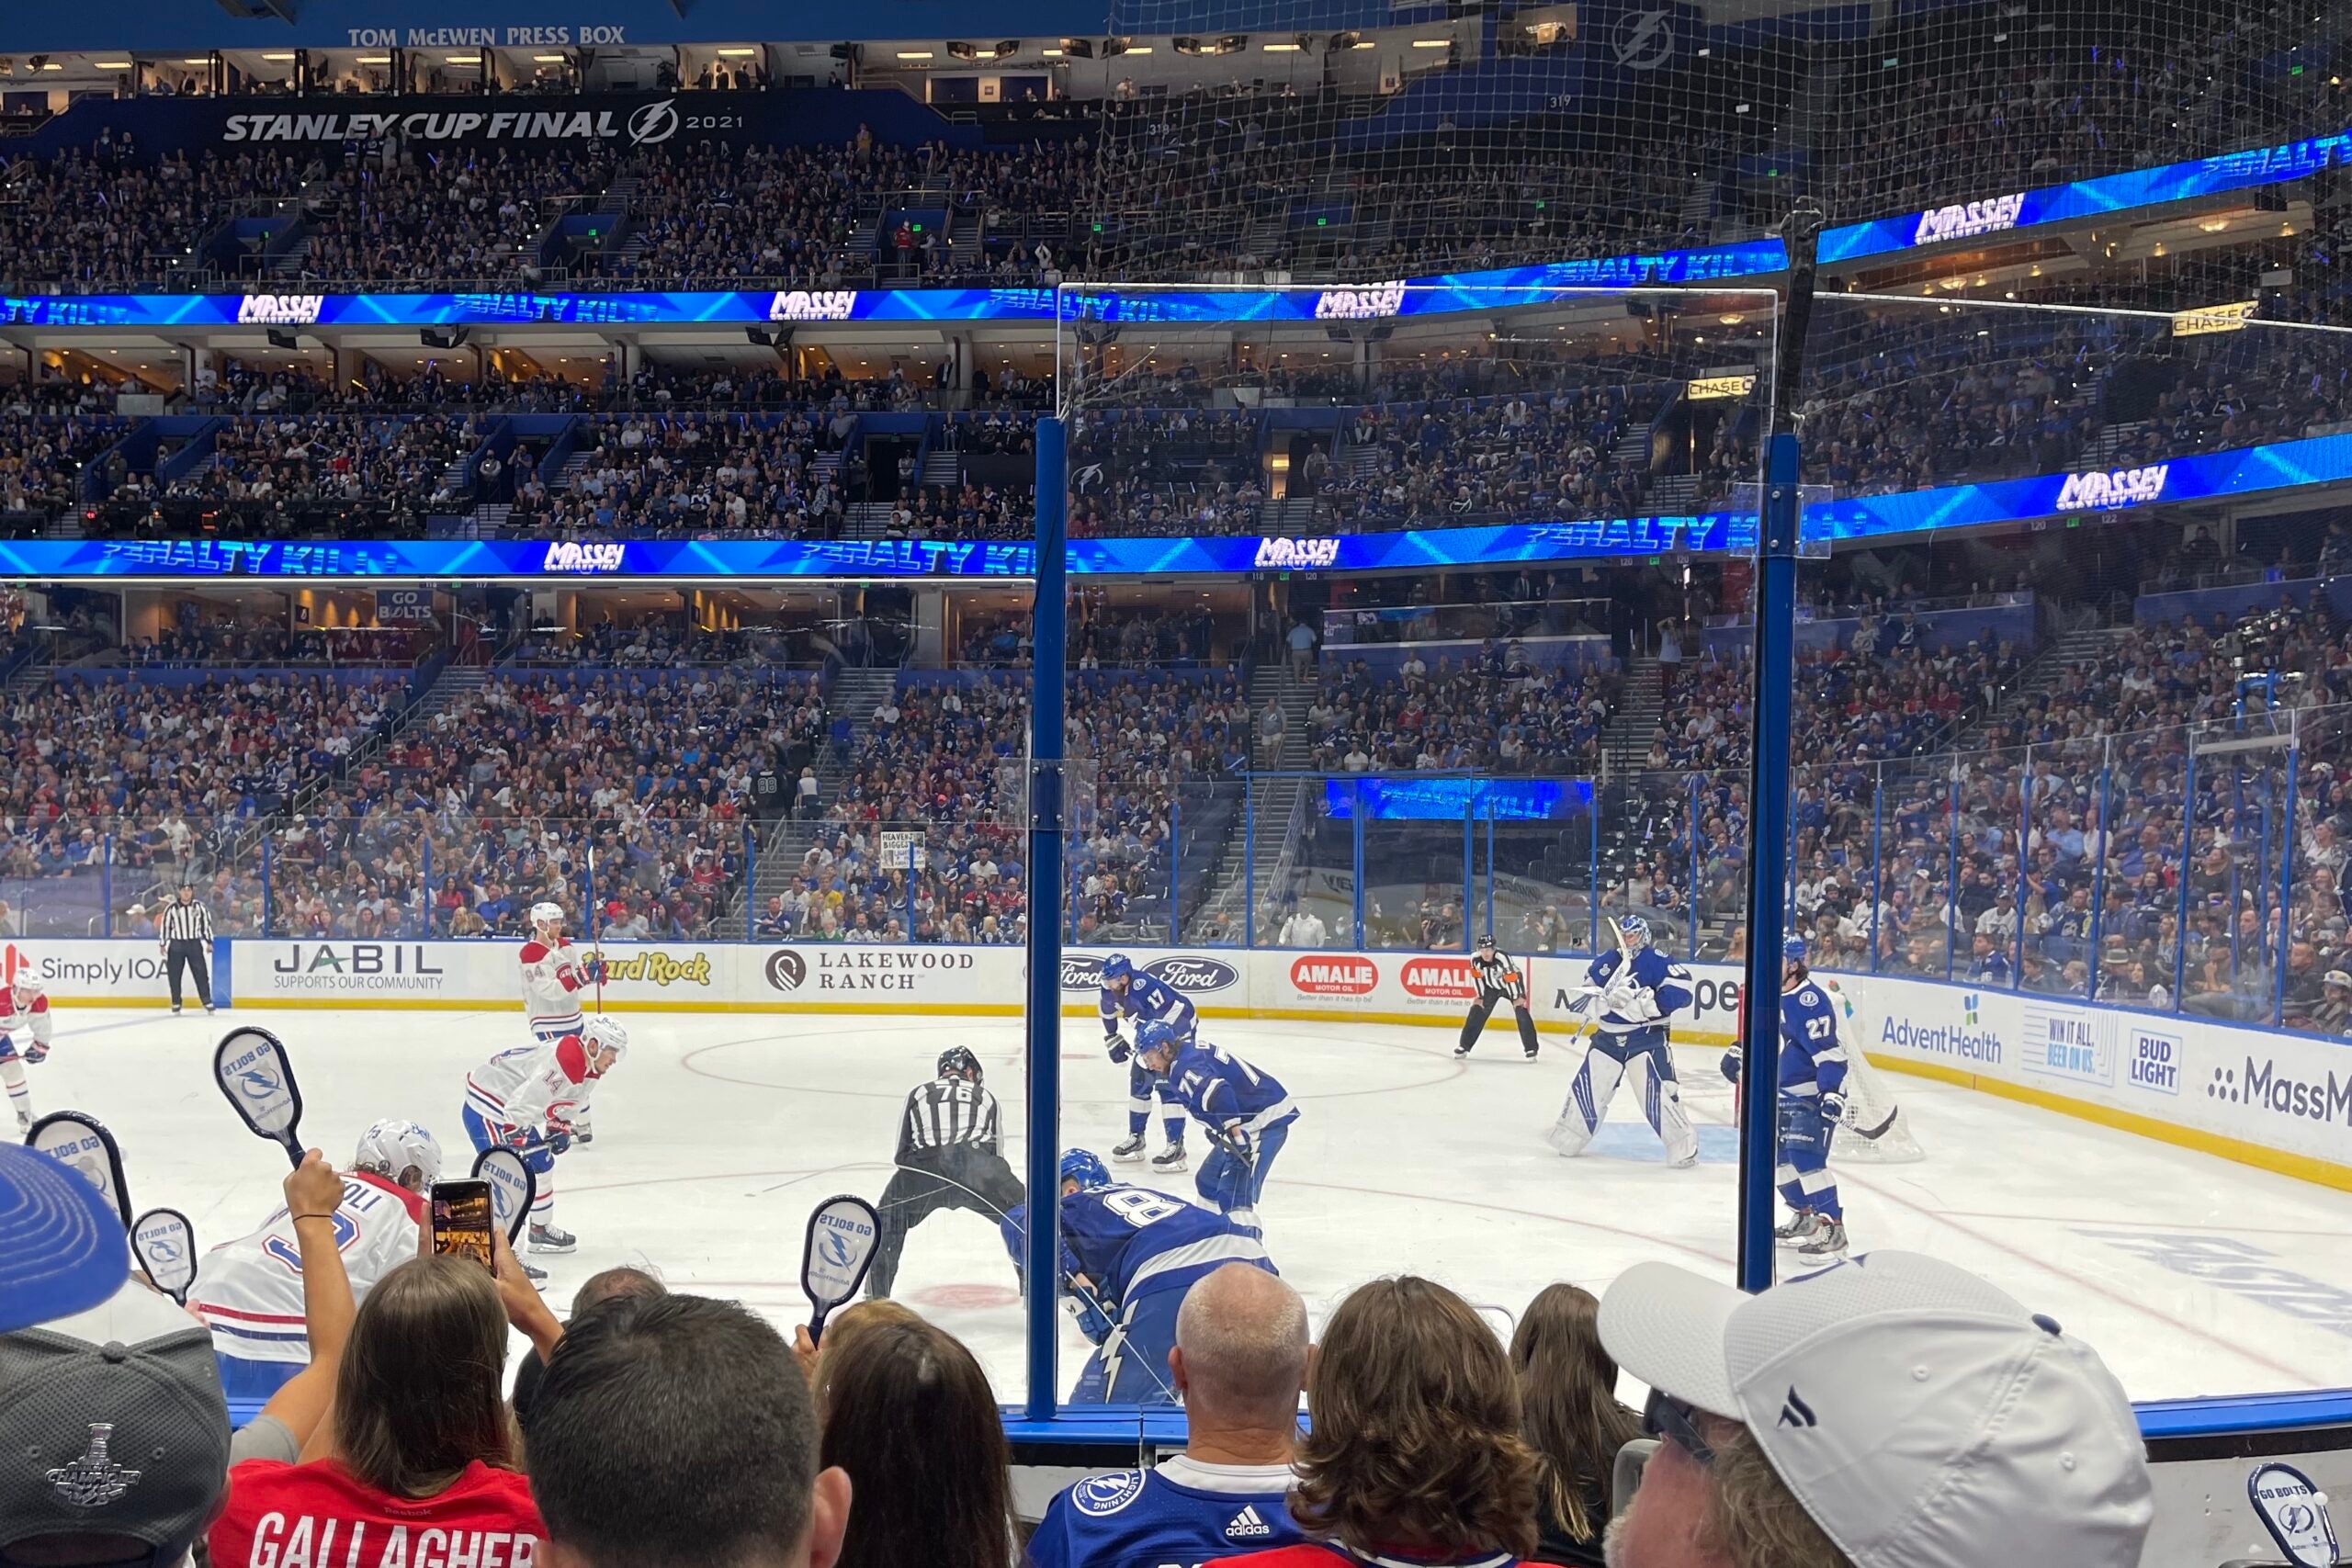 A picture from the 2021 Stanley Cup Finals between the Tampa Bay Lightning and Montreal Canadiens